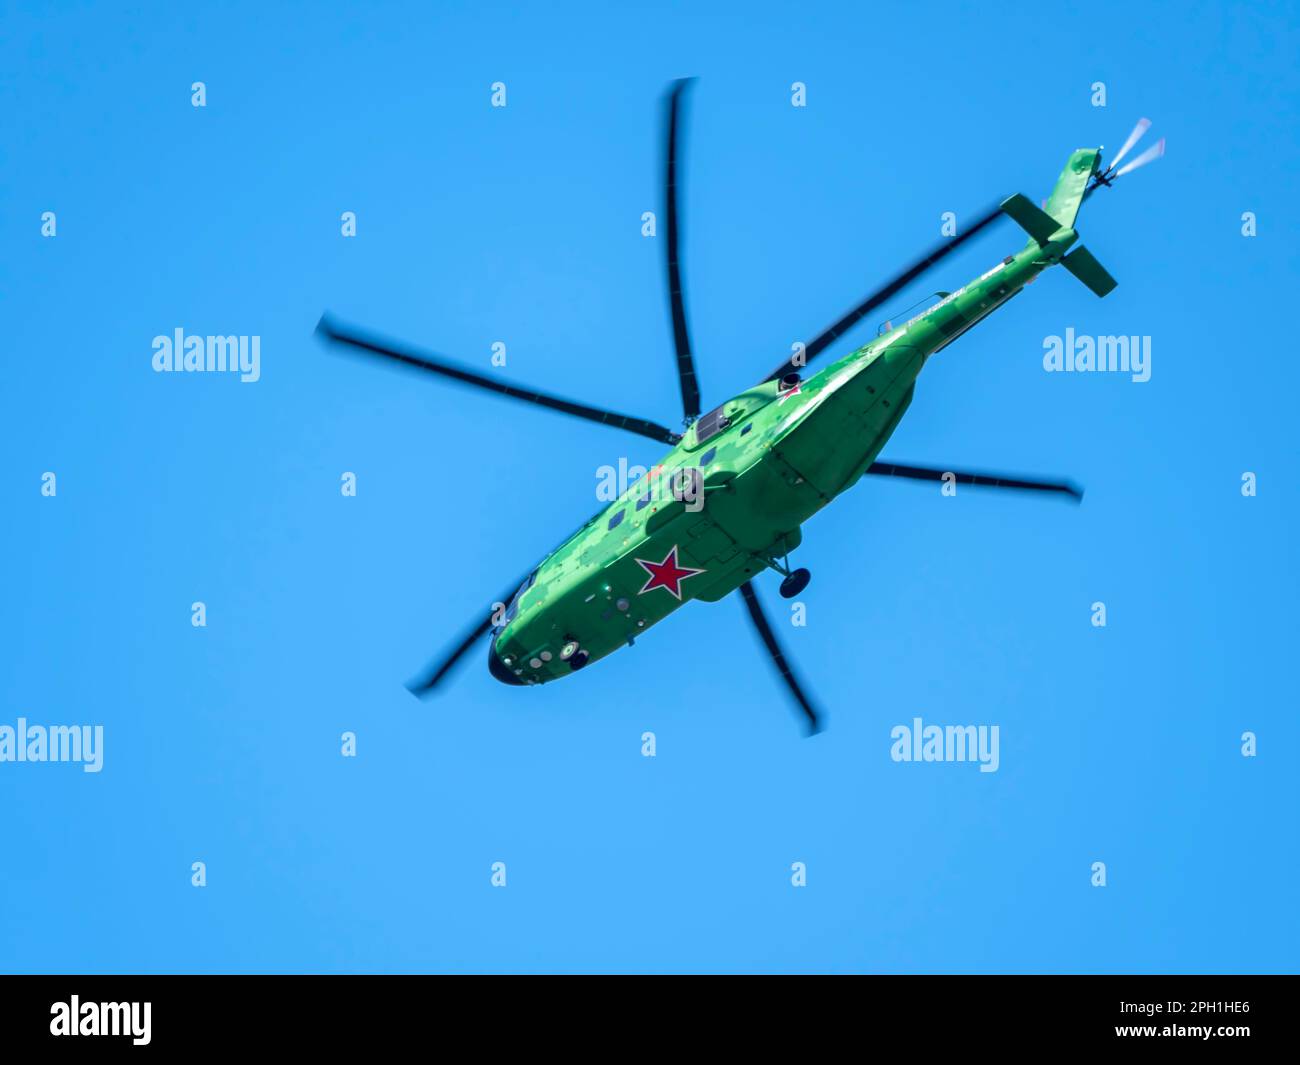 ZHUKOVSKY, RUSSIA - SEPTEMBER 01, 2019: Demonstration of the Mi-38 helicopter of the Russian Air Force at MAKS-2019, Russia. Stock Photo